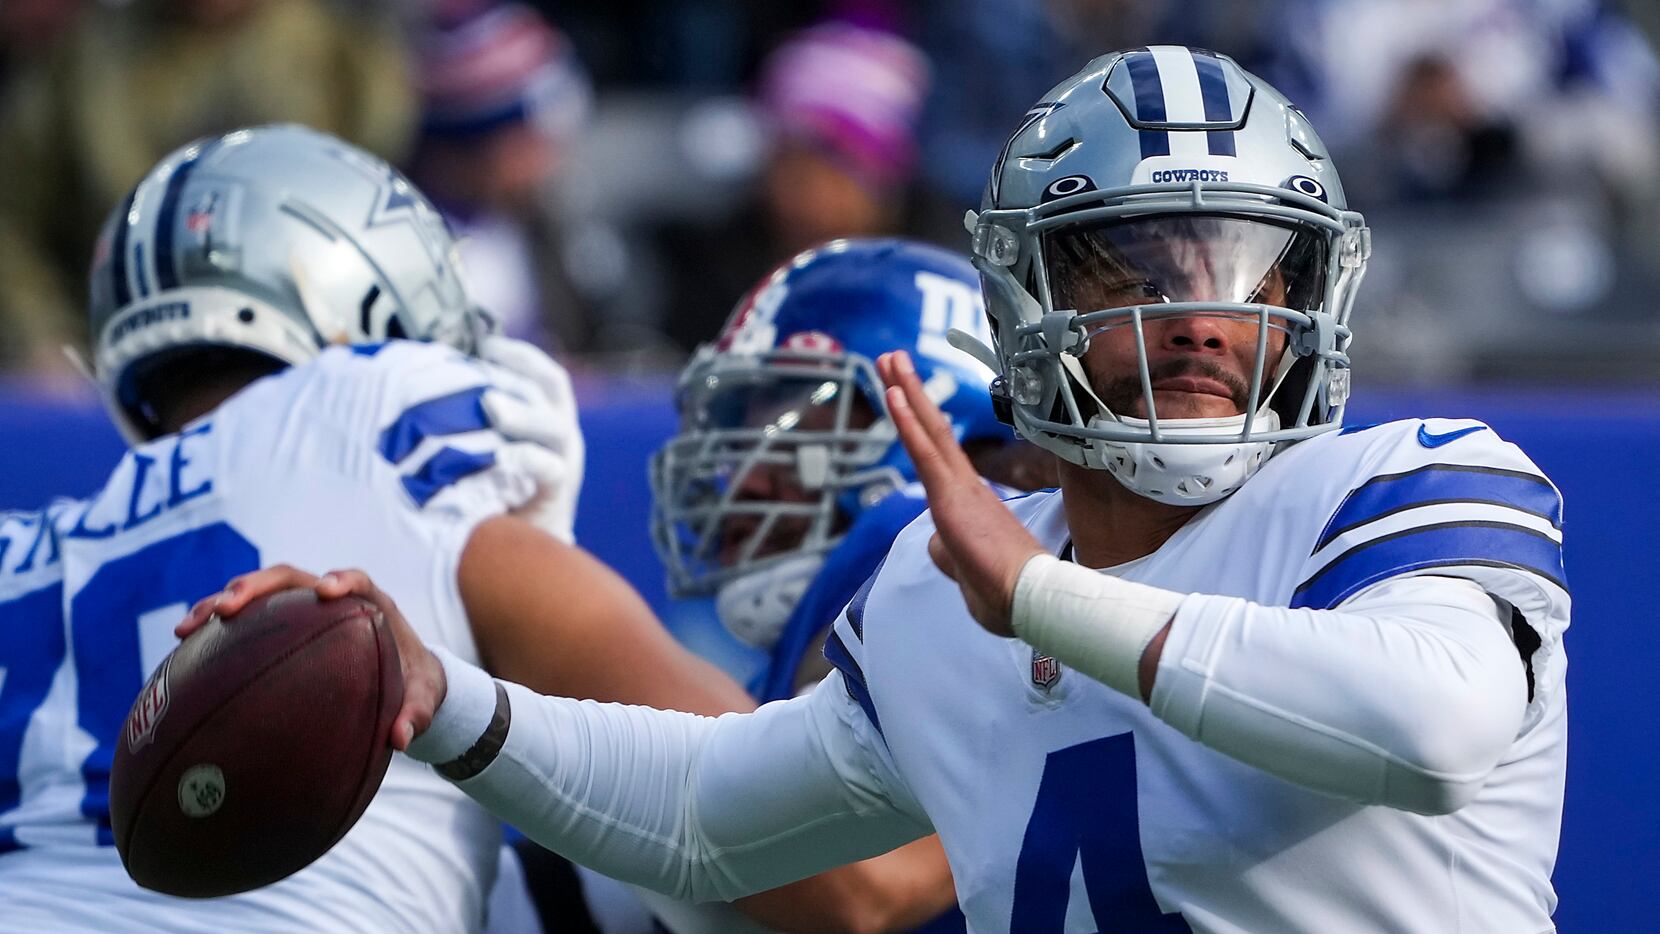 How to watch Cowboys-Giants on Sunday Night Football: Start time